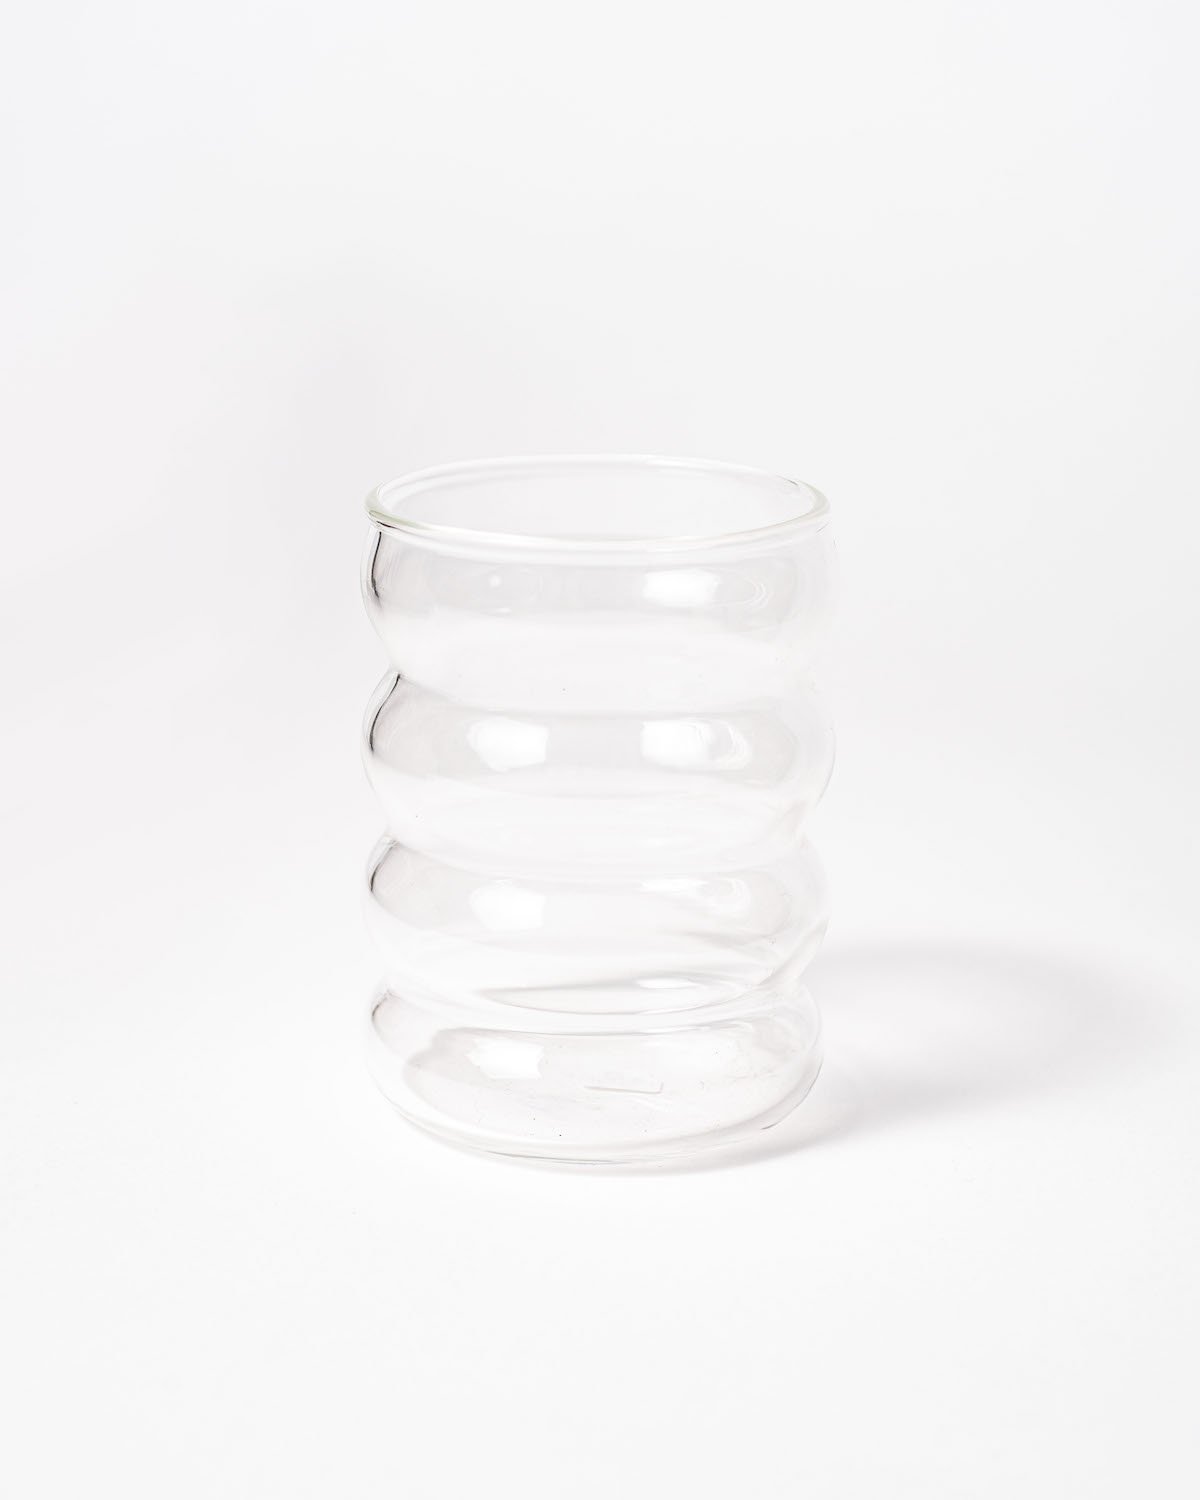 Bubble Cup by It's Blume